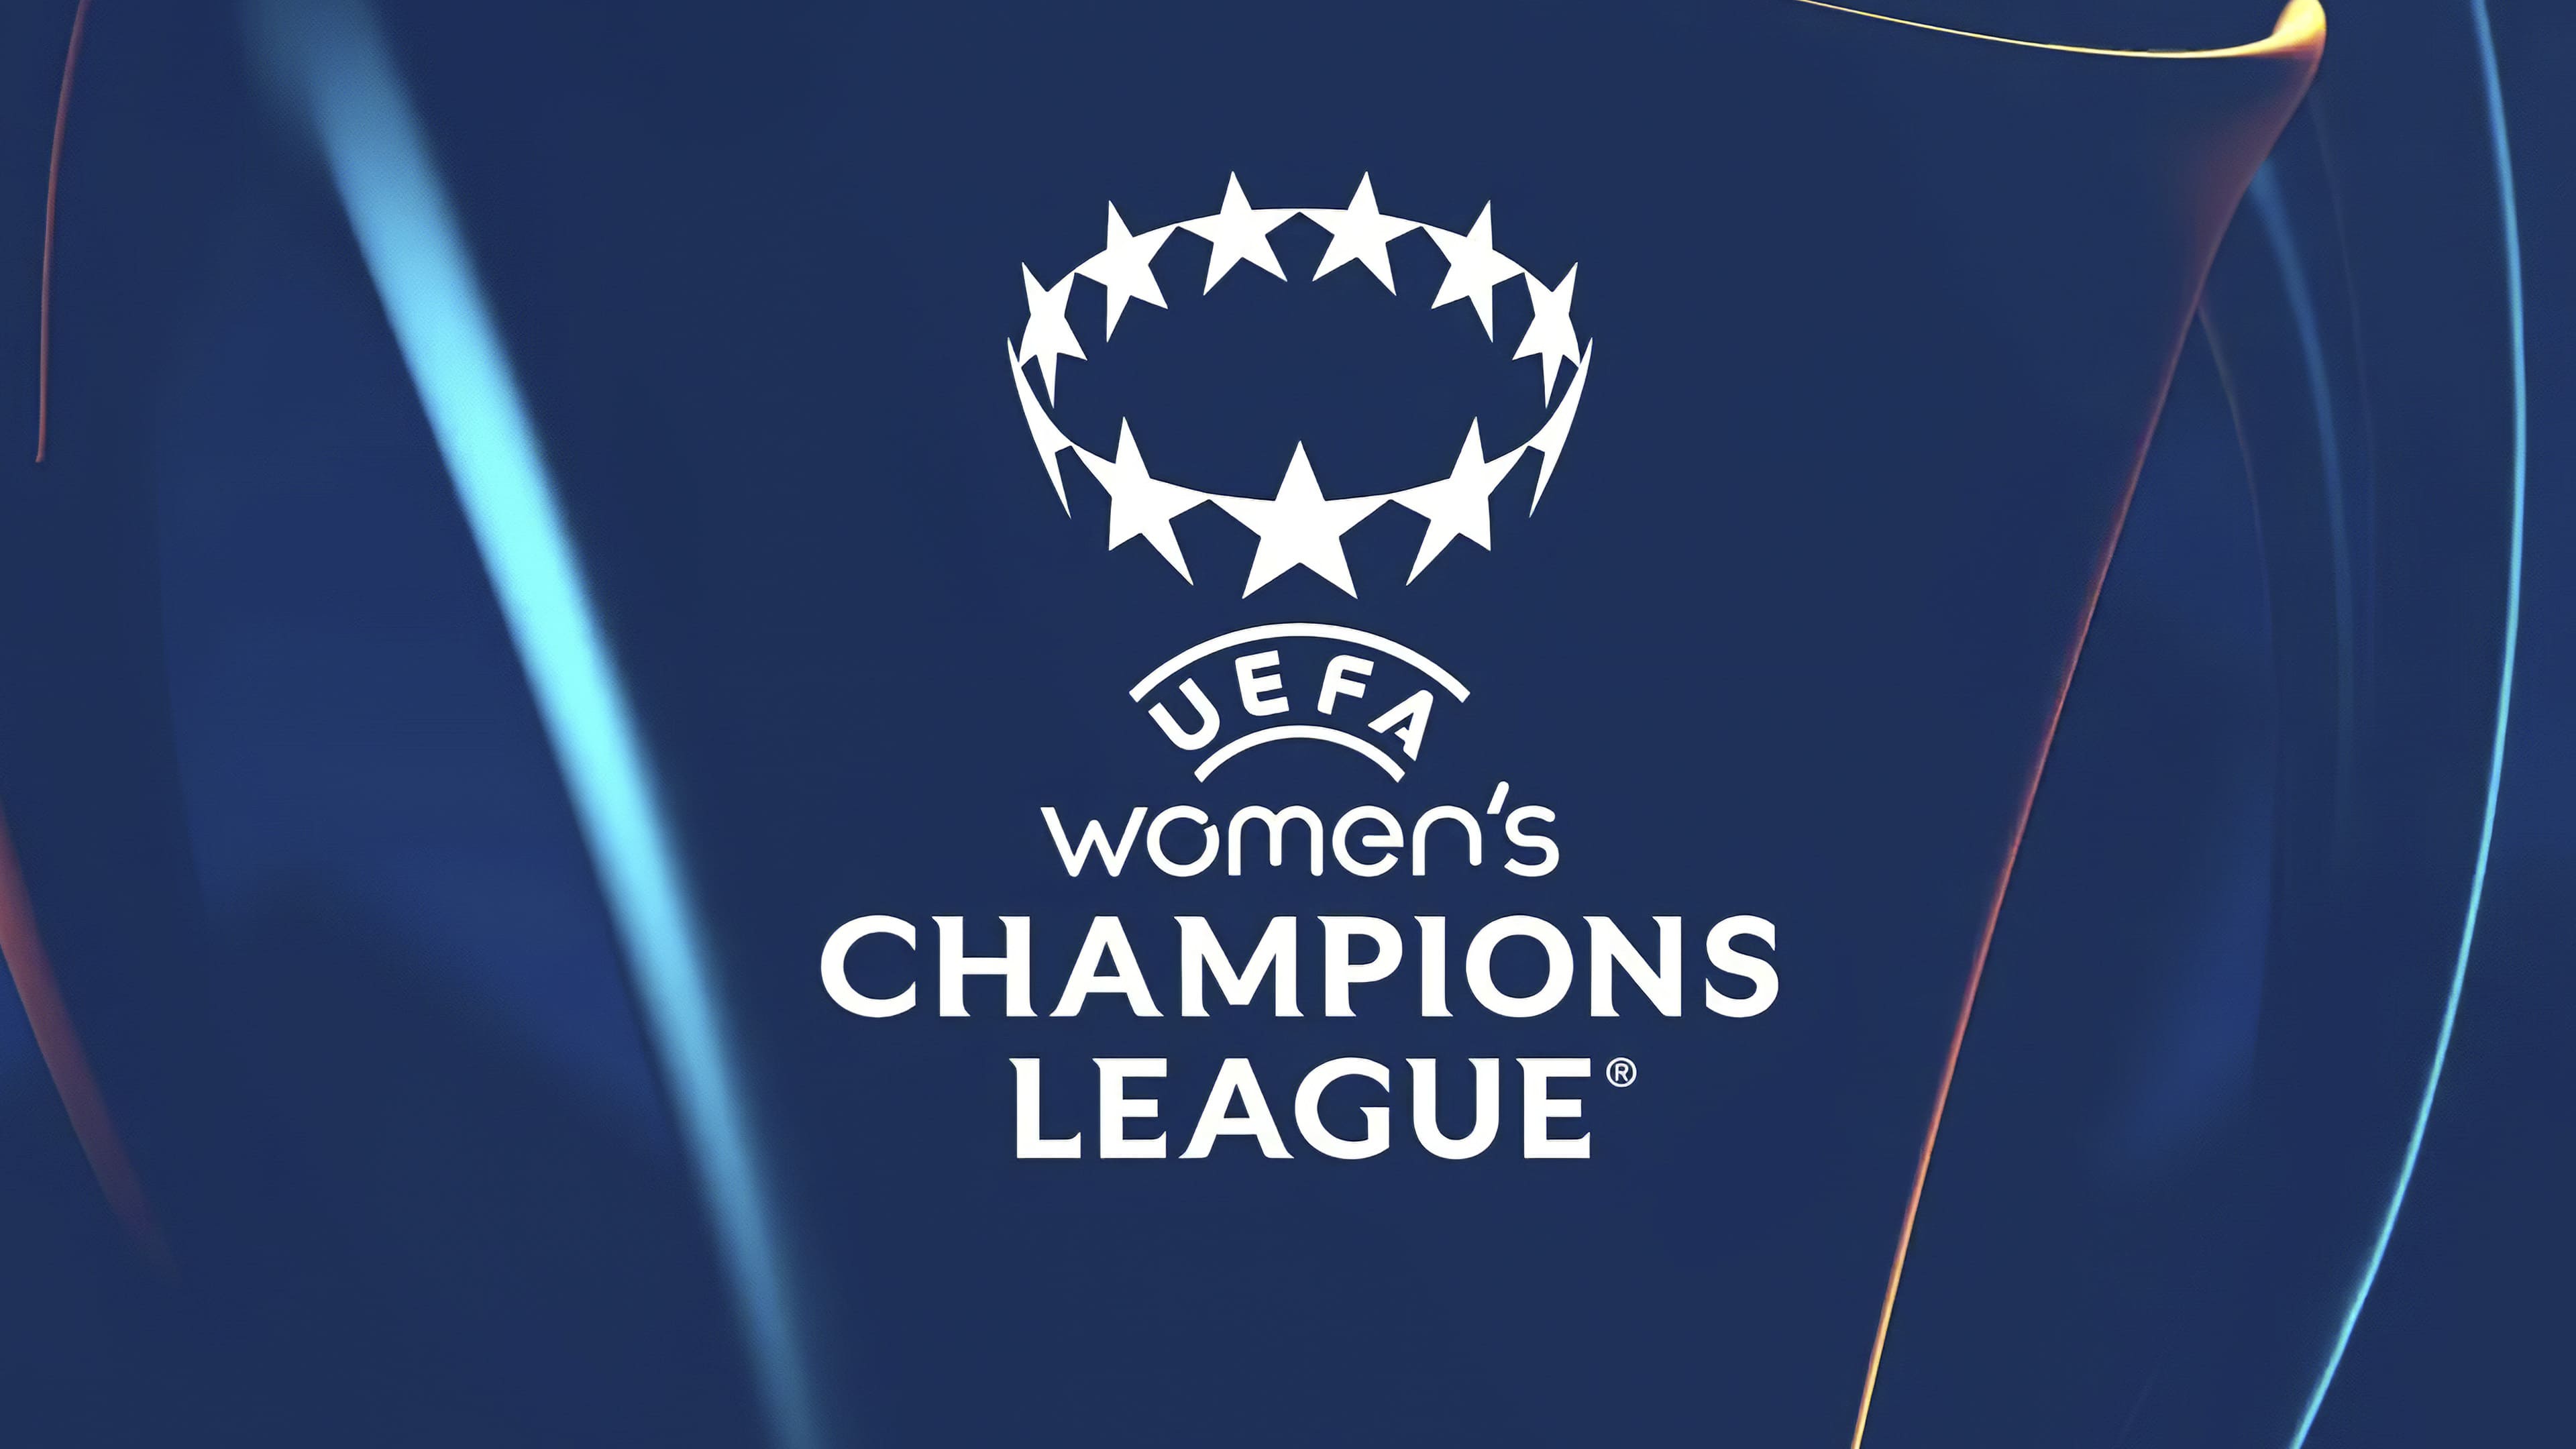 UEFA Women's Champions League unveils new logo and anthem